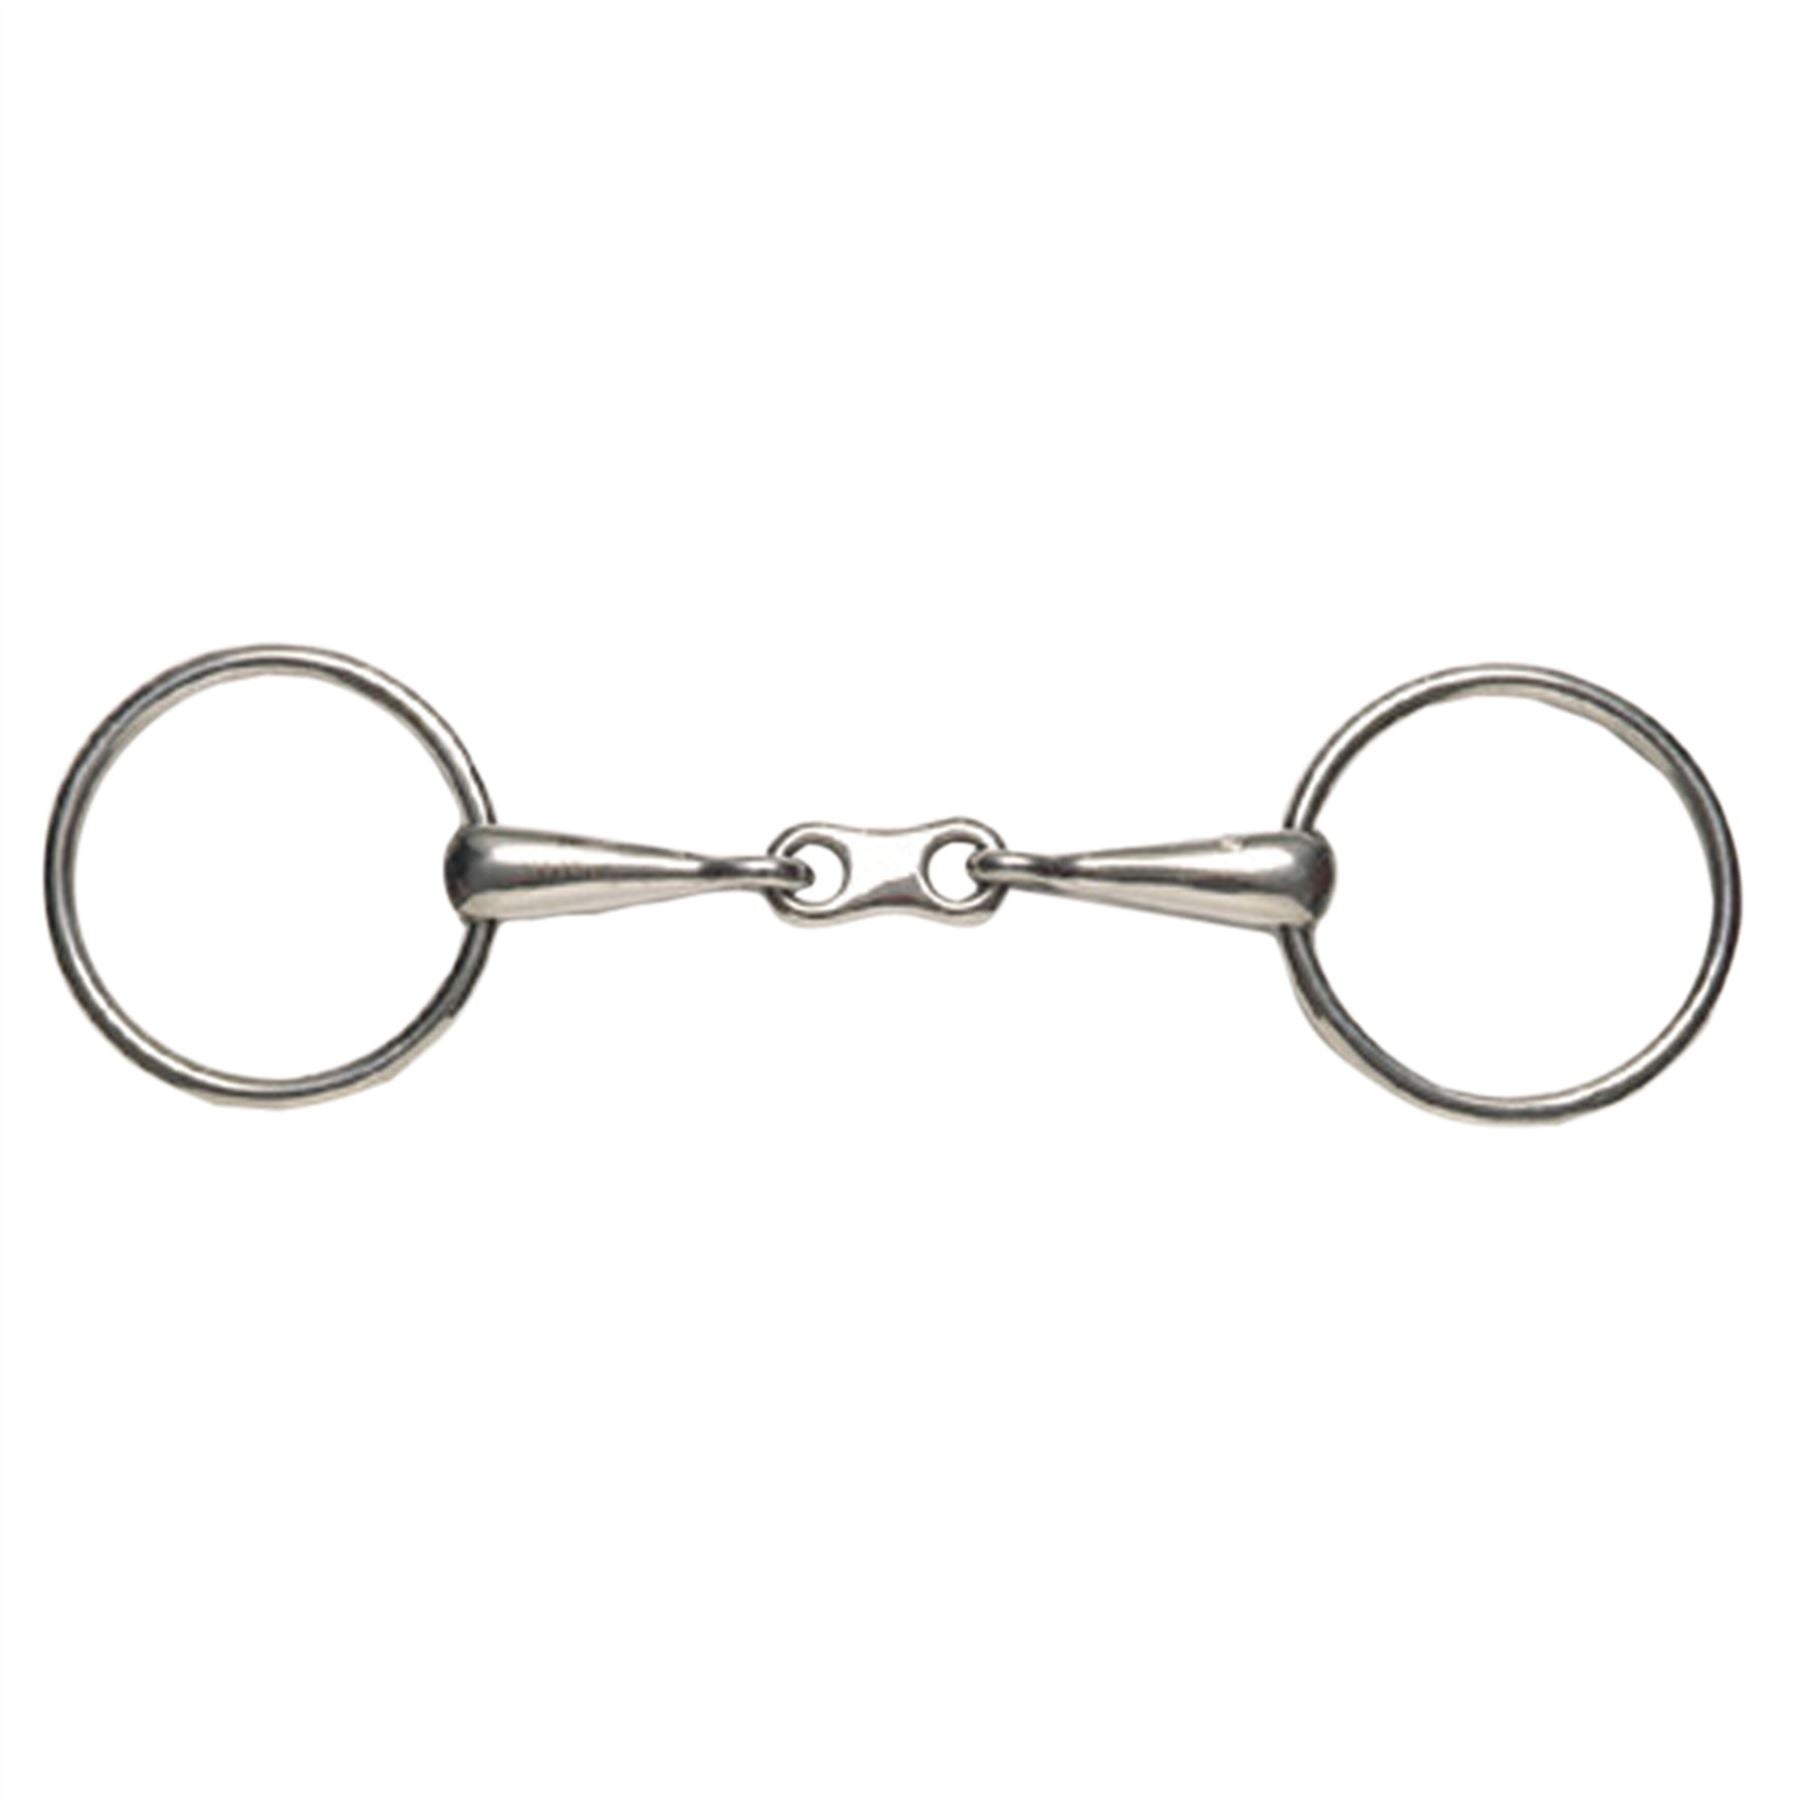 Korsteel Thin Mouth Loose Ring French Link Snaffle - Just Horse Riders